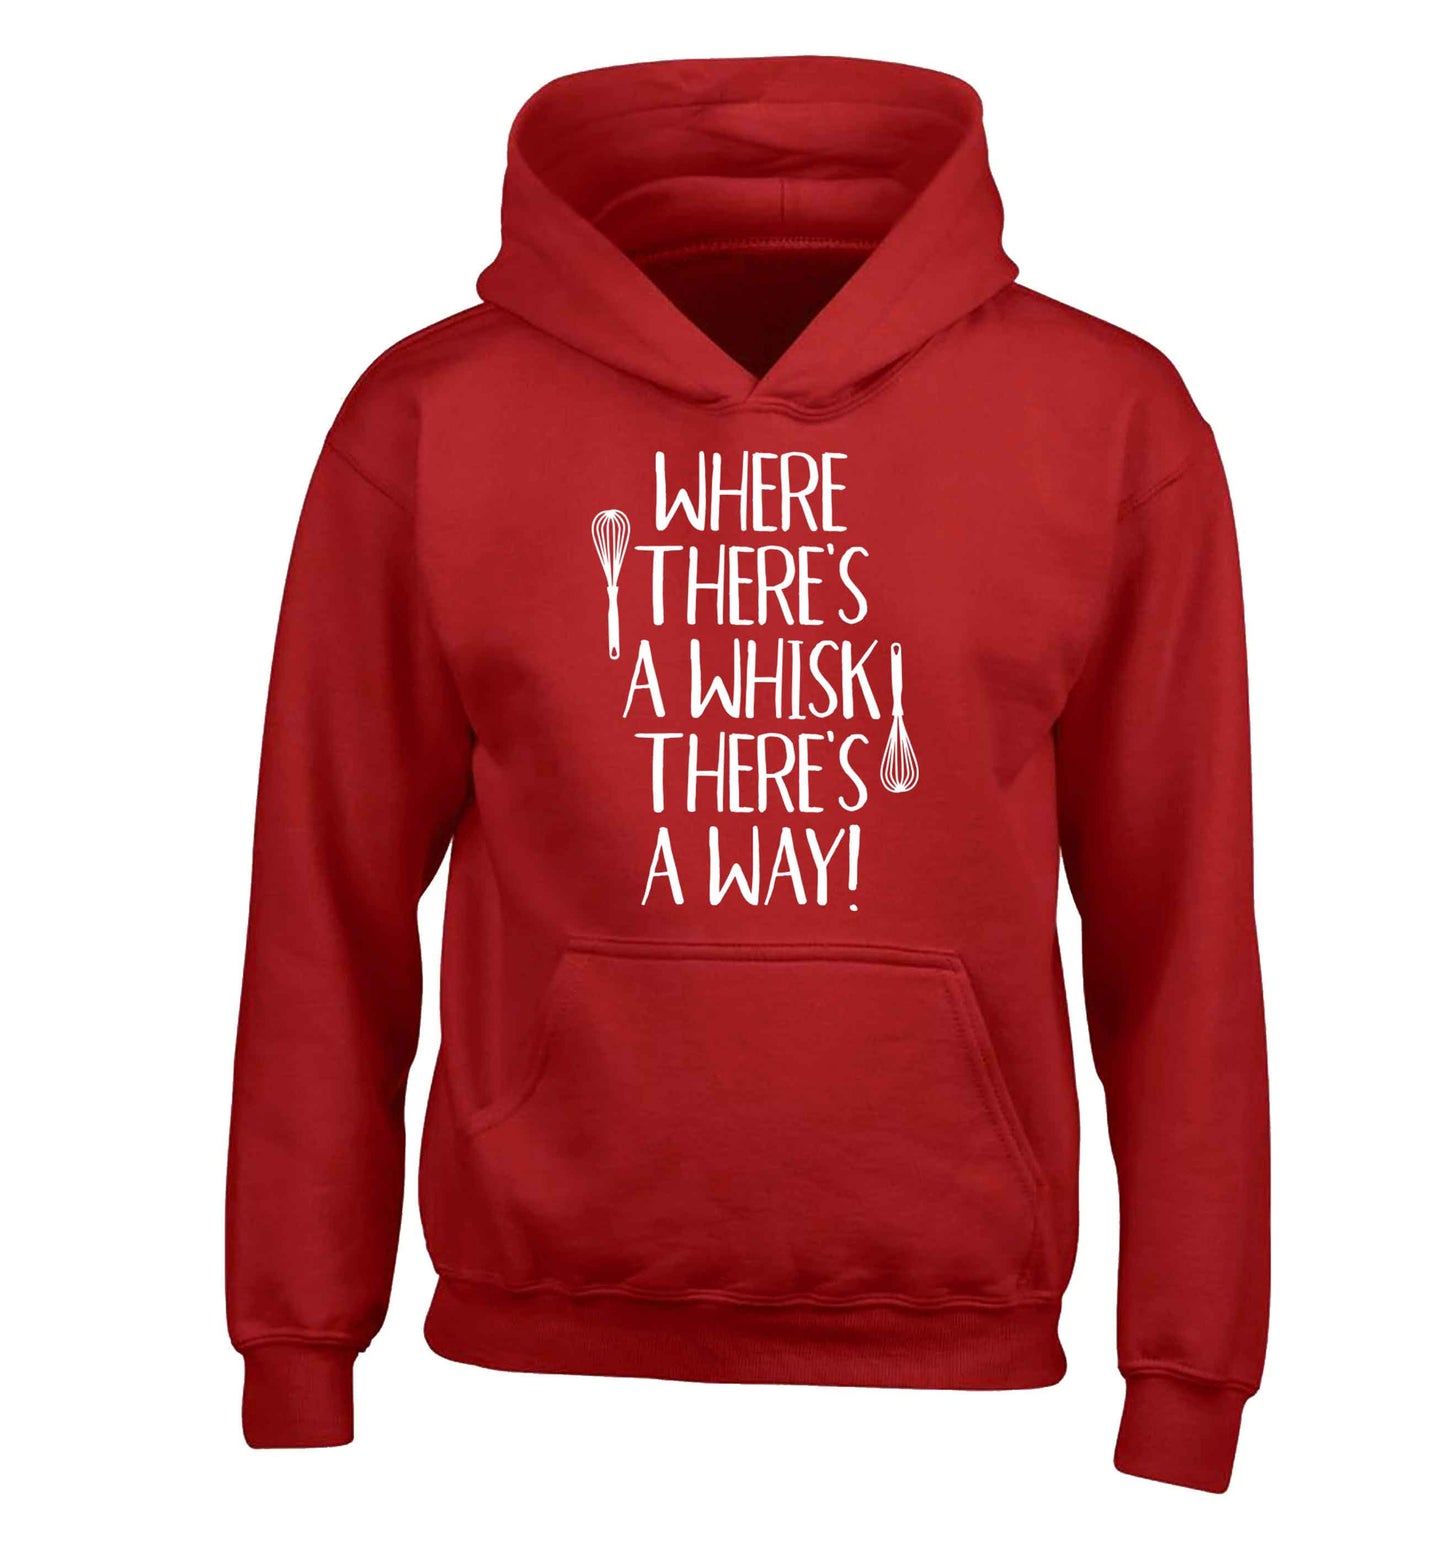 Where there's a whisk there's a way children's red hoodie 12-13 Years